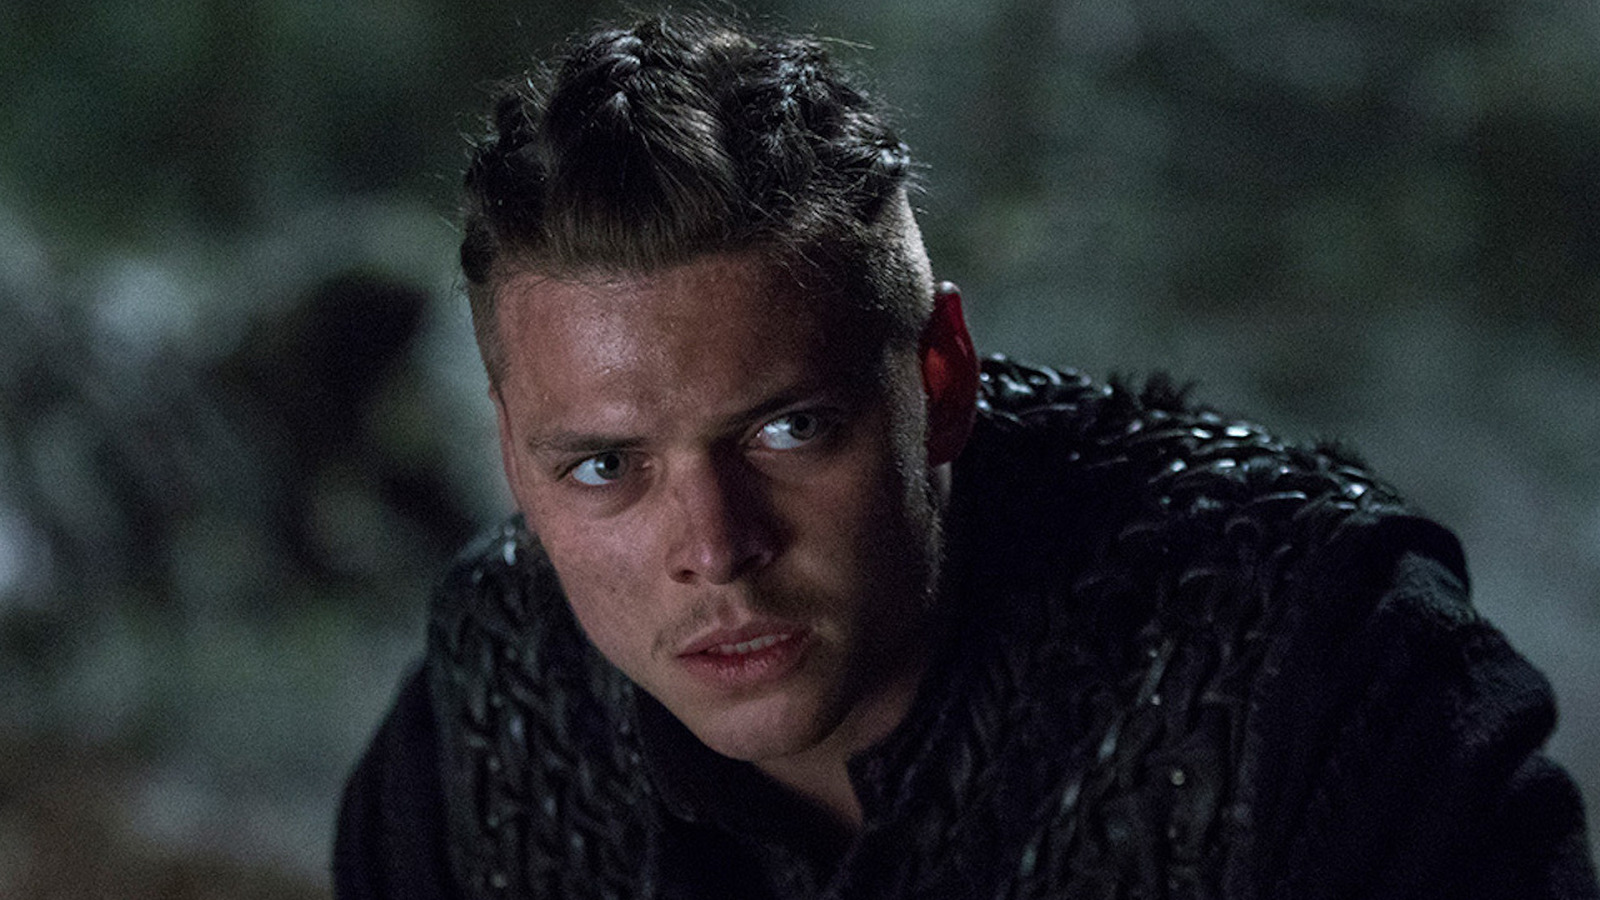 No Spoilers] Ivar the Boneless.🔥🔥🔥 share what first comes in